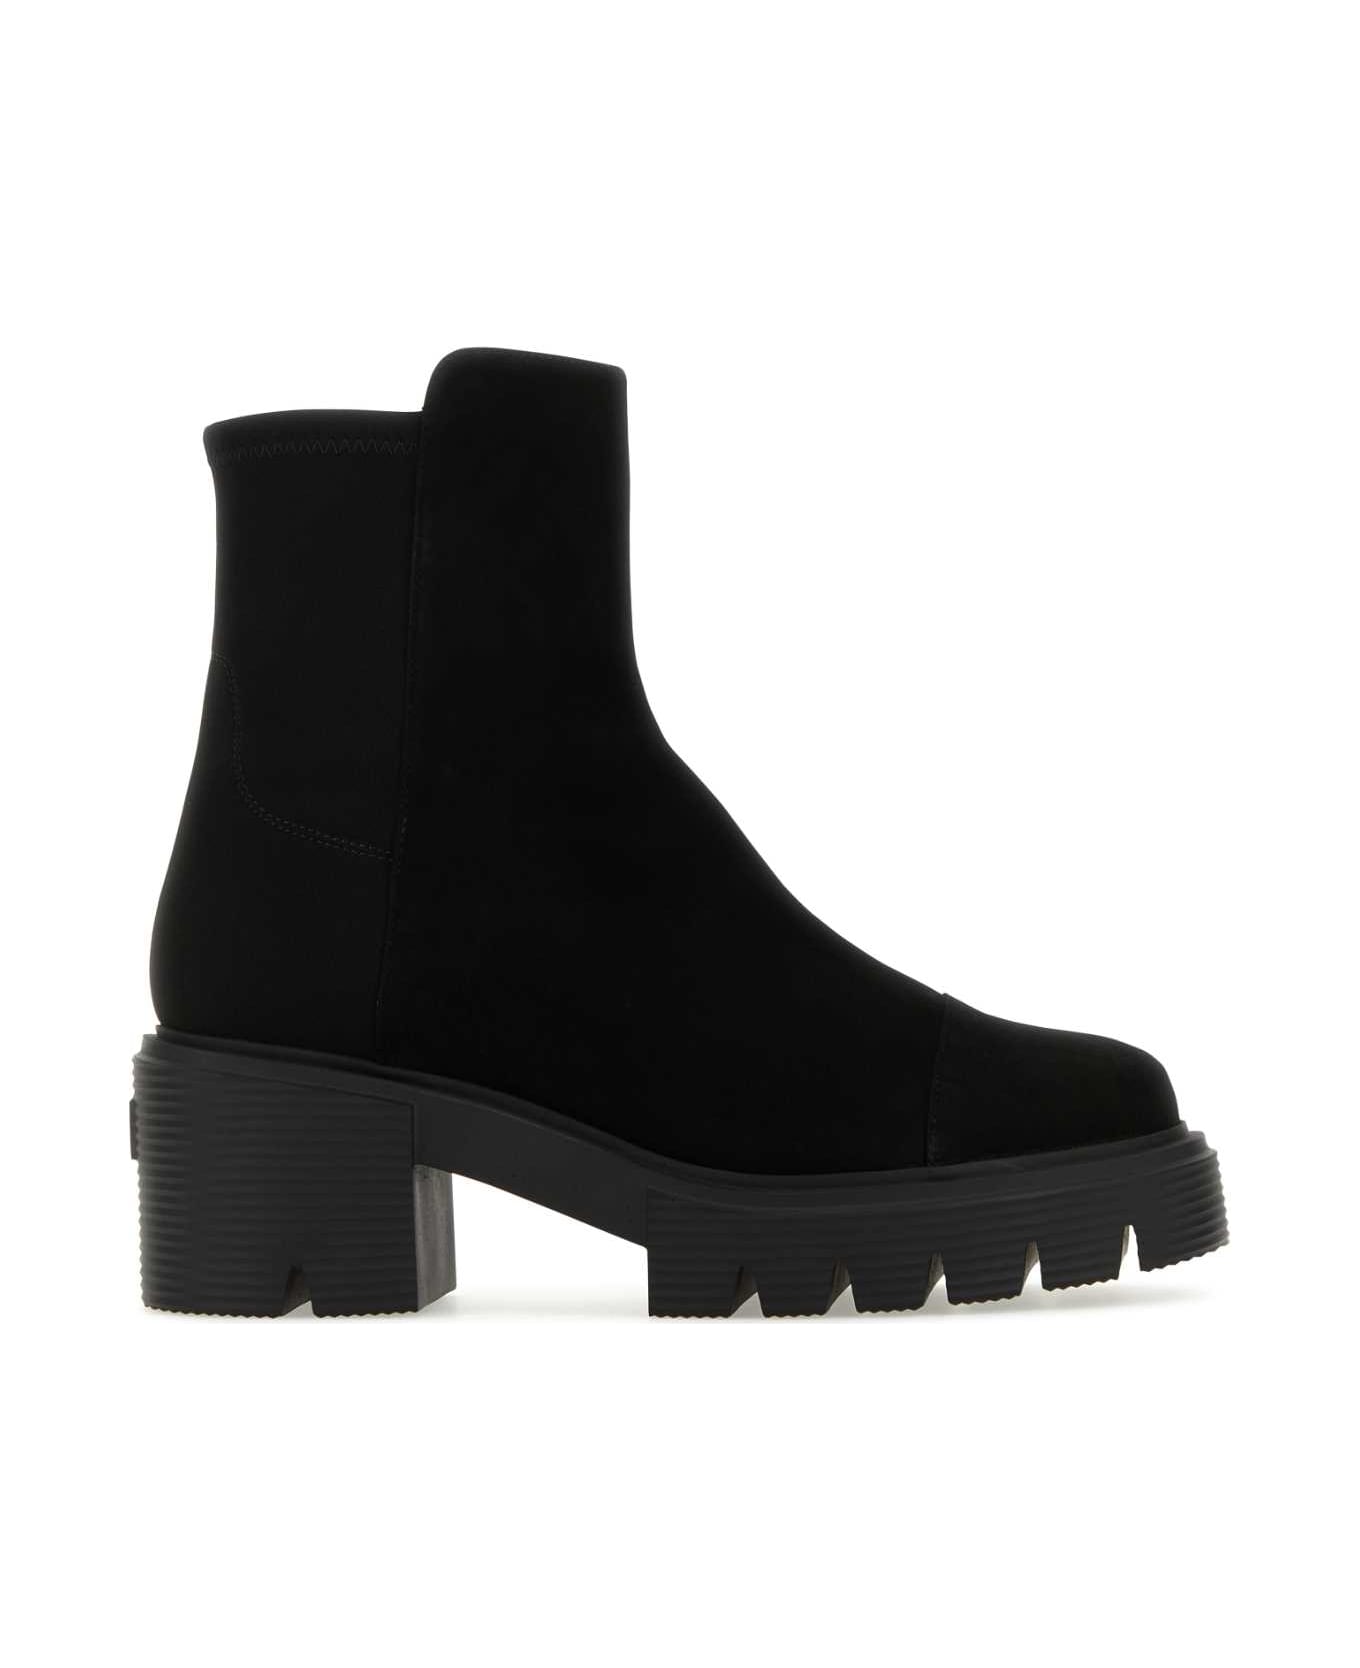 Stuart Weitzman Black Suede And Fabric 5050 Soho Ankle Boots - Black ブーツ